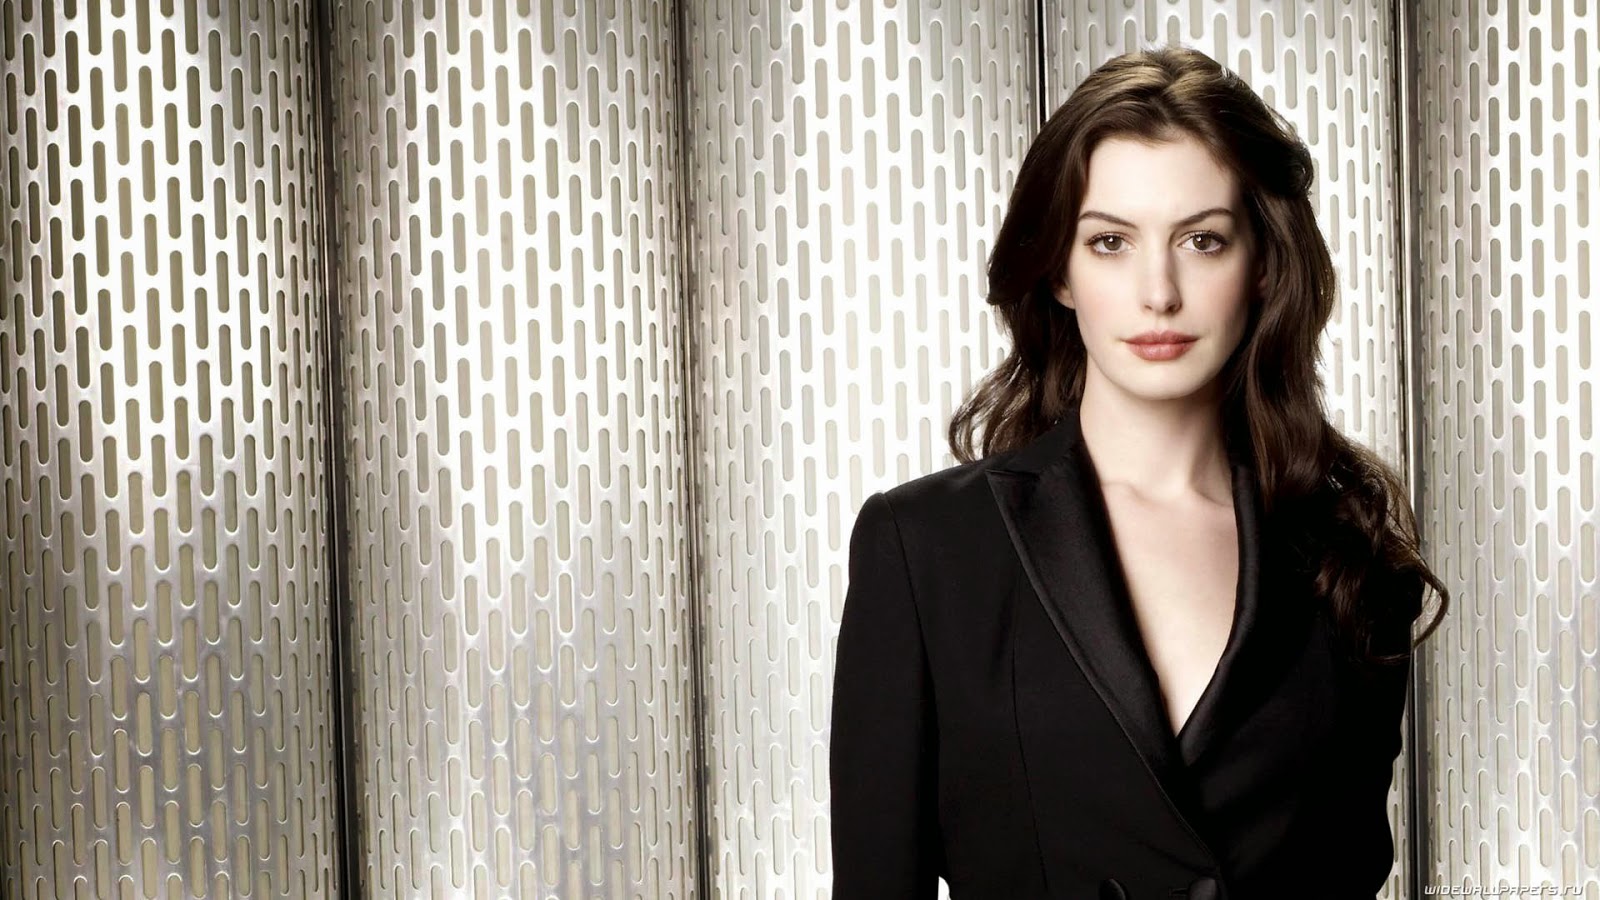 Latest Photoshoot of Anne Hathaway - Entertainment to All